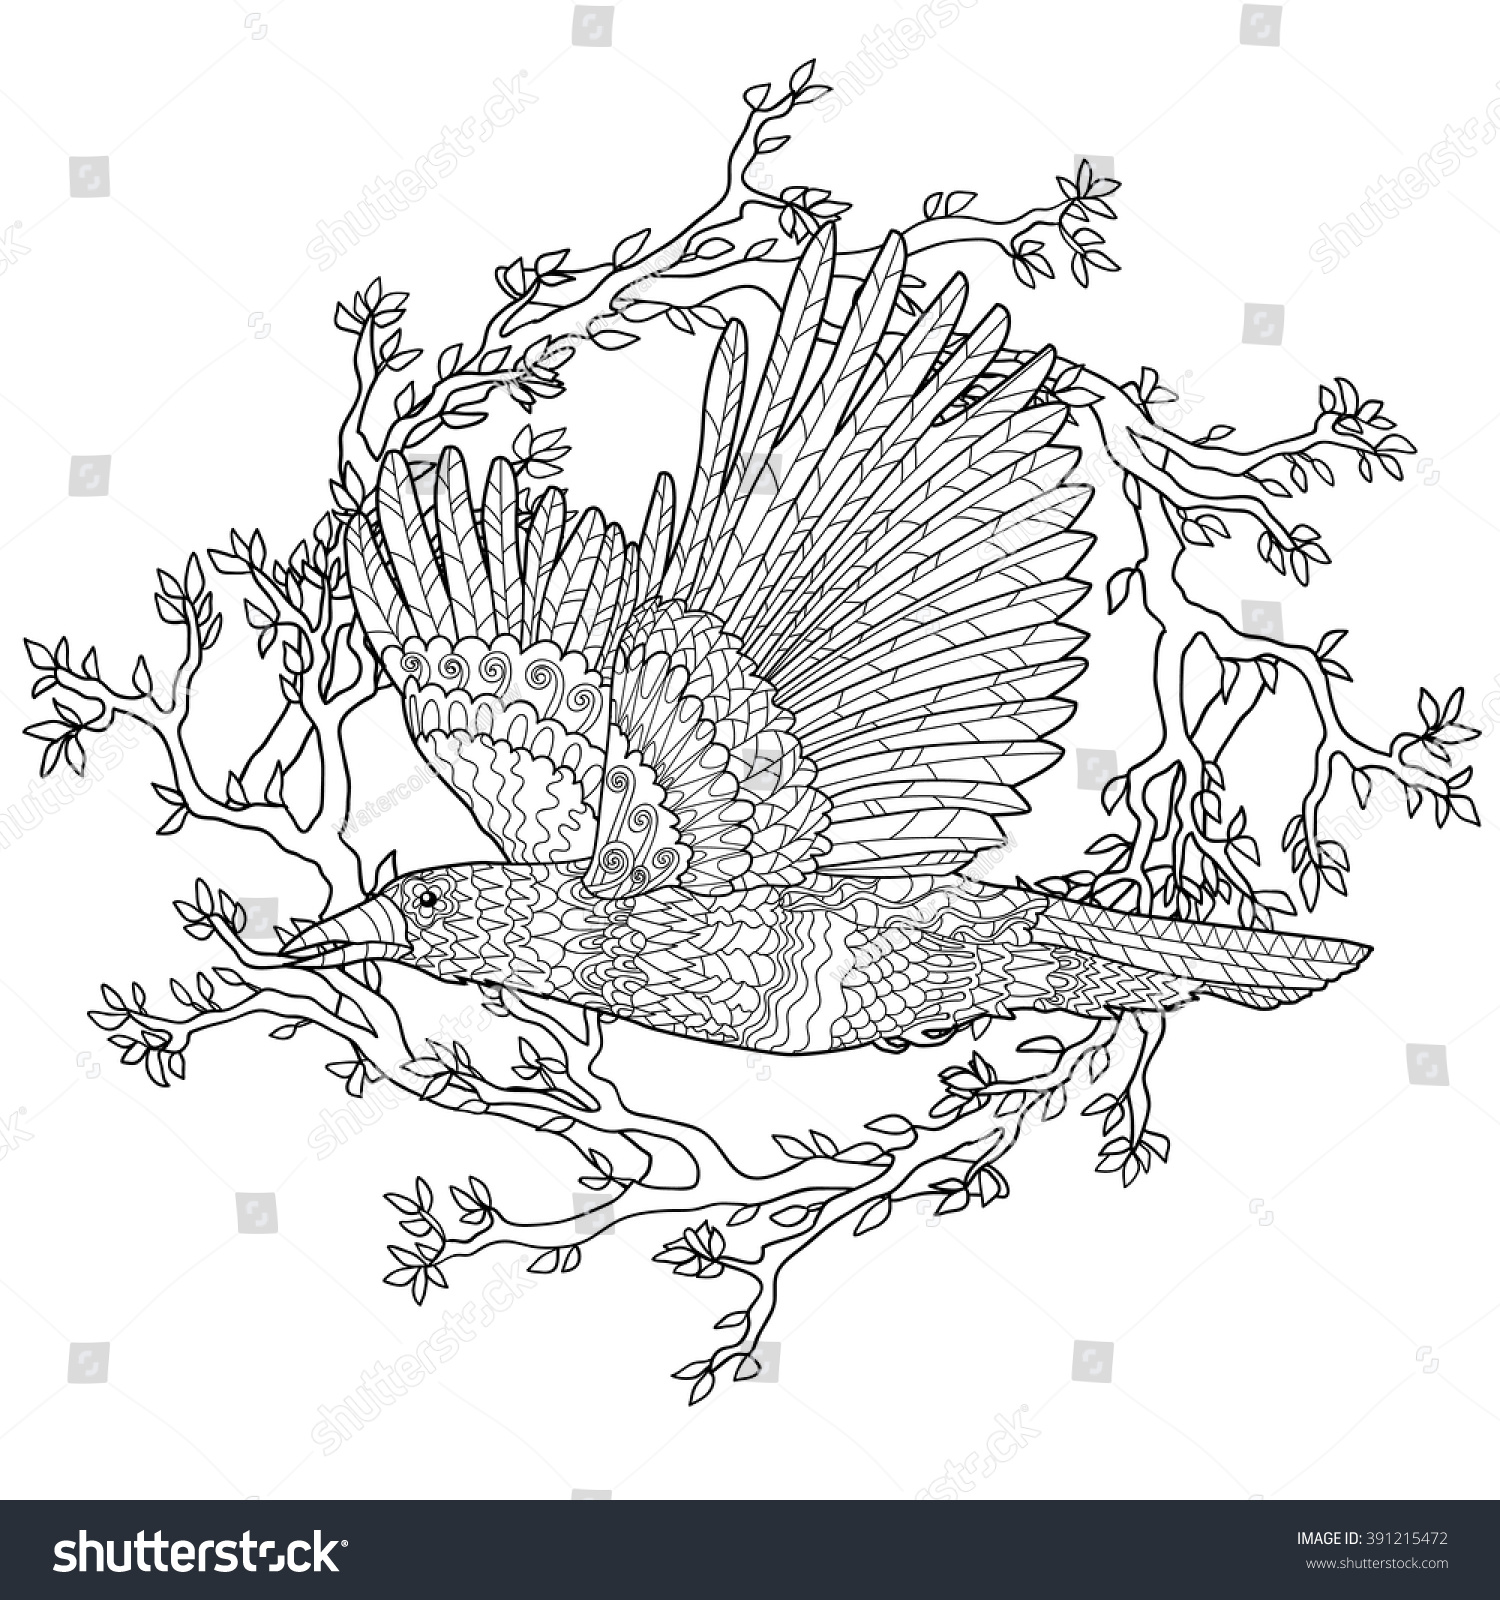 Adult anti stress coloring page with crow Black